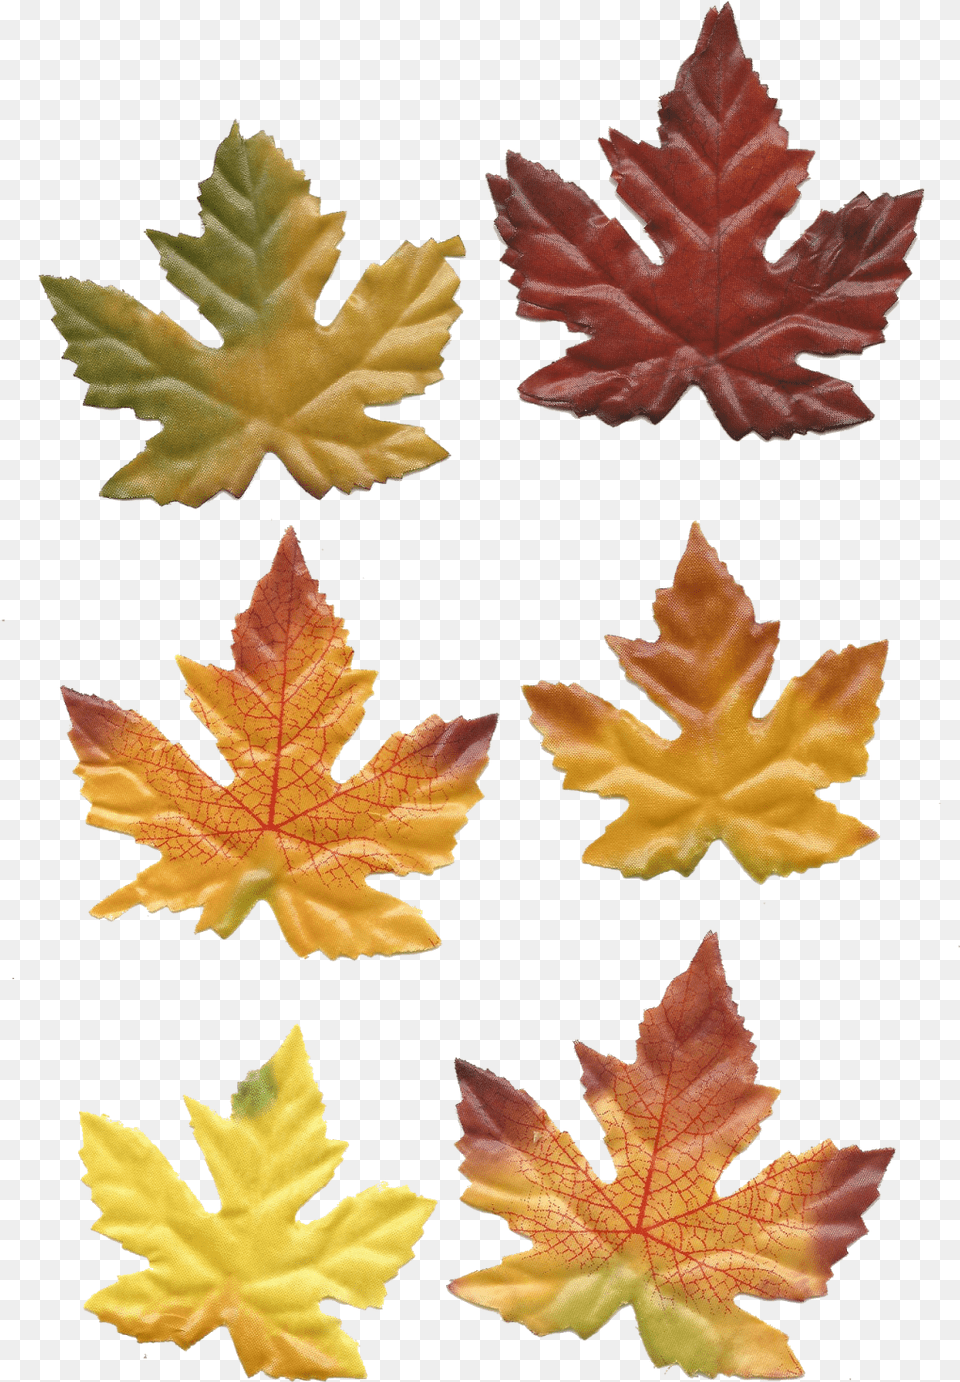 Leaves Are Falling Pumpkins Are Picked And Thanksgiving39s Fall Decorations Printable, Leaf, Plant, Tree, Maple Free Png Download